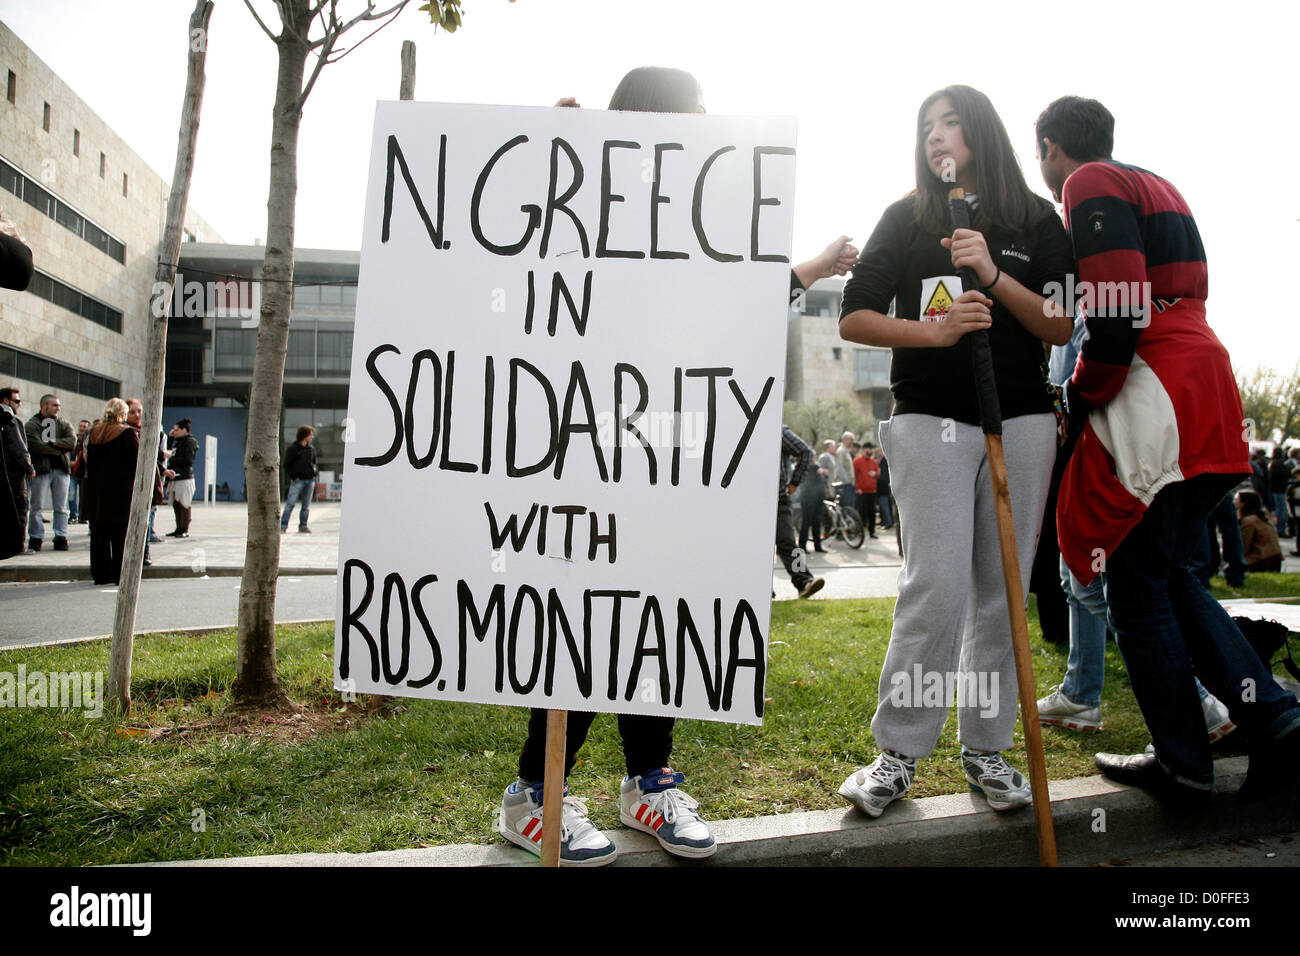 Thessaloniki,Greece. November 24, 2012. Protesters carrying placard that reads 'North Greece in solidarity with Rosia Montana'. Thousands of people flooded the streets of Thessaloniki to protest against efforts by Hellas Gold, a subsidiary of the Canadian firm Eldorado Gold, to mine the Skouries quarry on Mount Kakkavos, in the Halkidiki peninsula and the city of Kilkis in northern Greece. Stock Photo